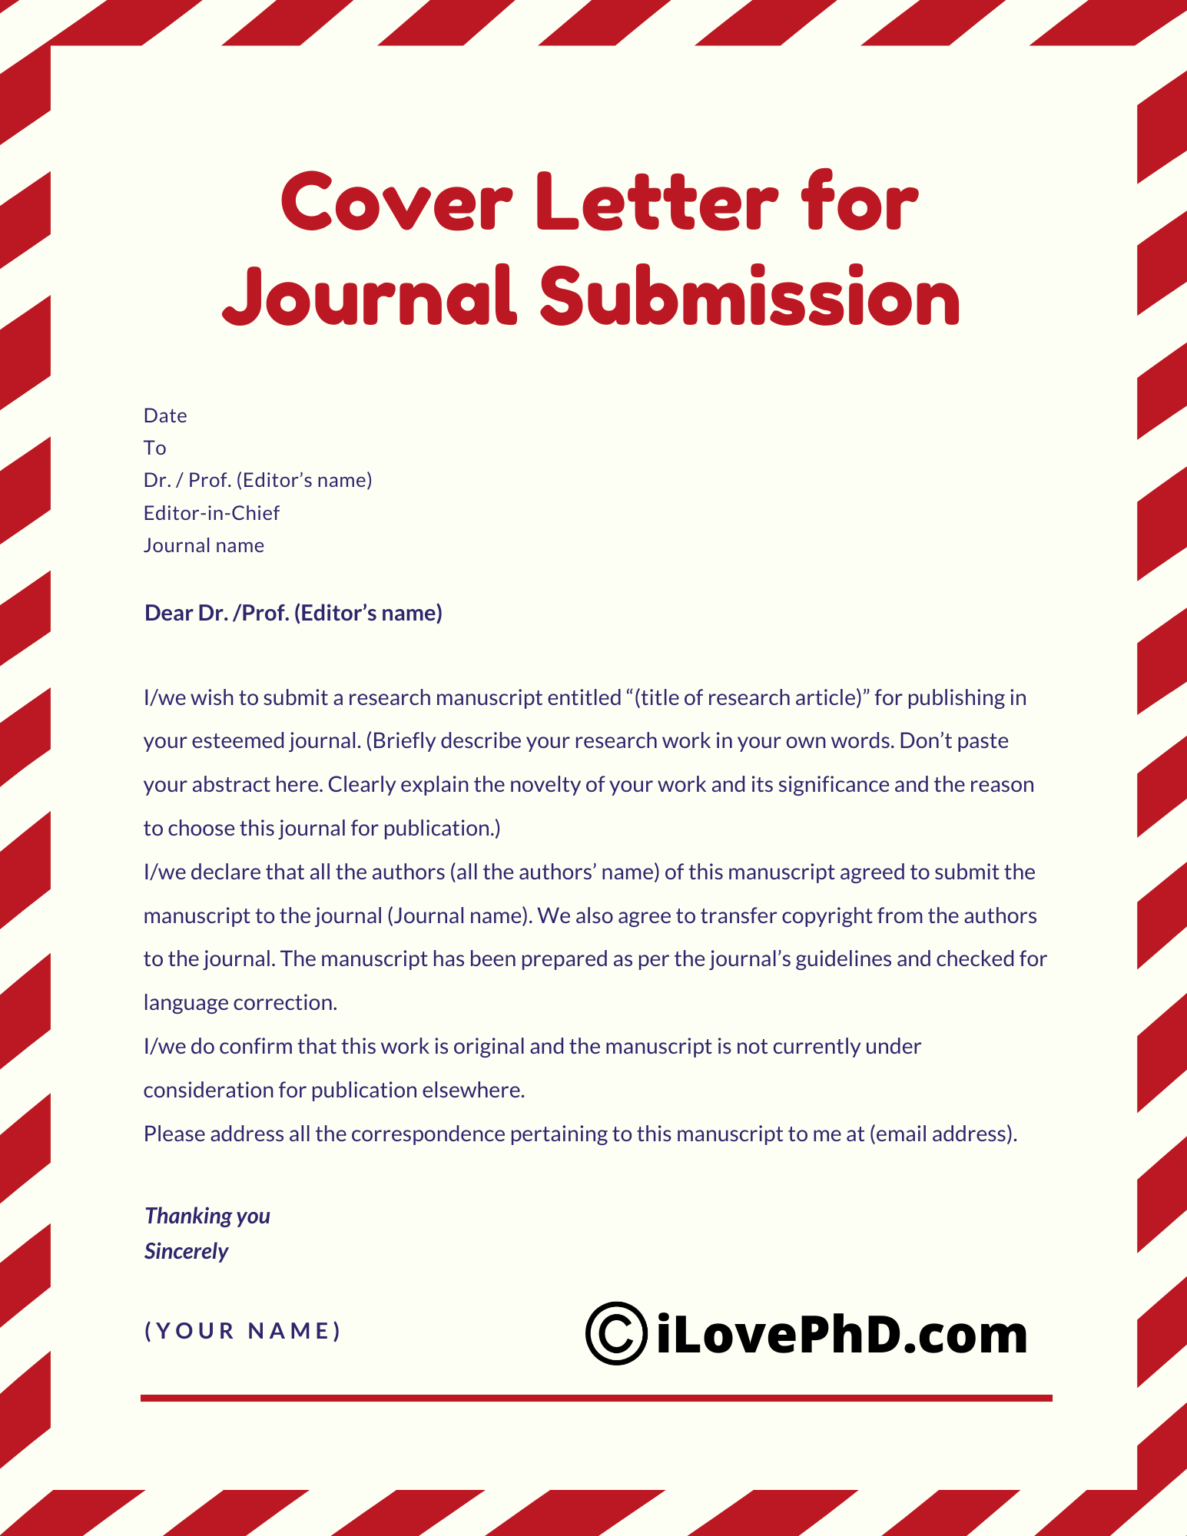 example of journal cover letter